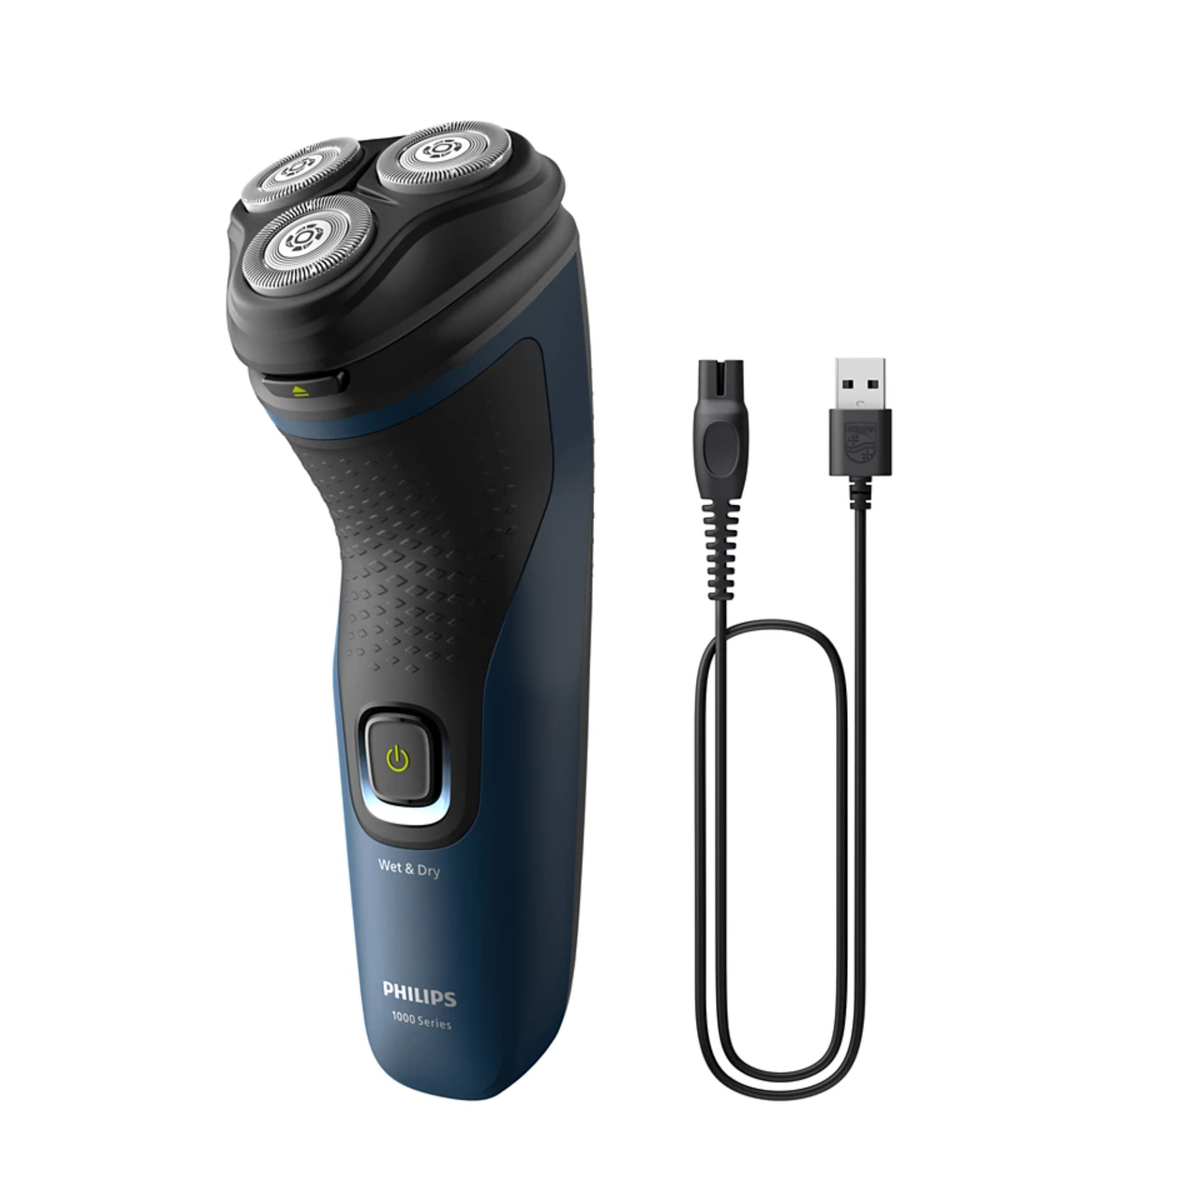 Philips Shaver 1000 Series Wet & Dry Electric Shaver S1151/00